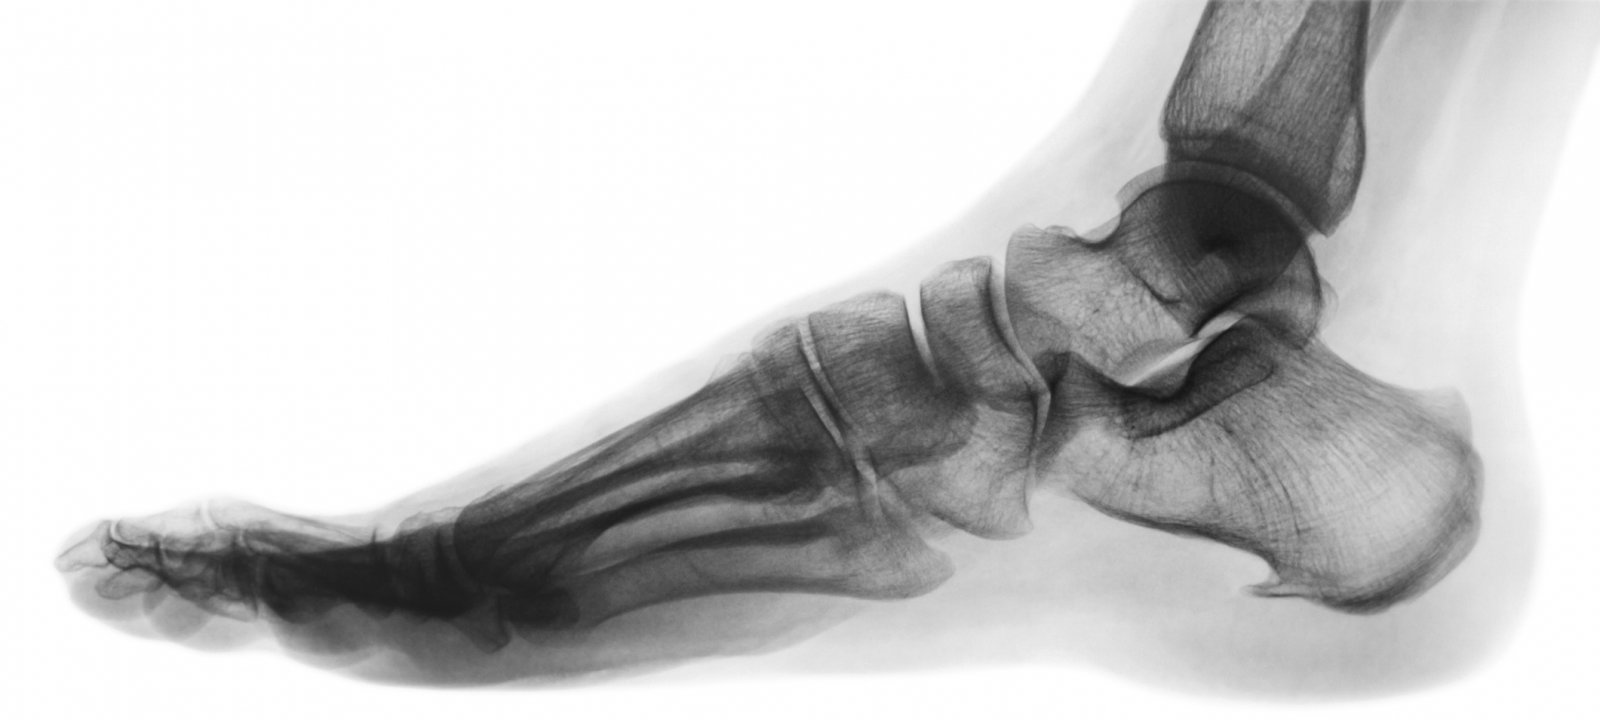 X-ray of a human foot